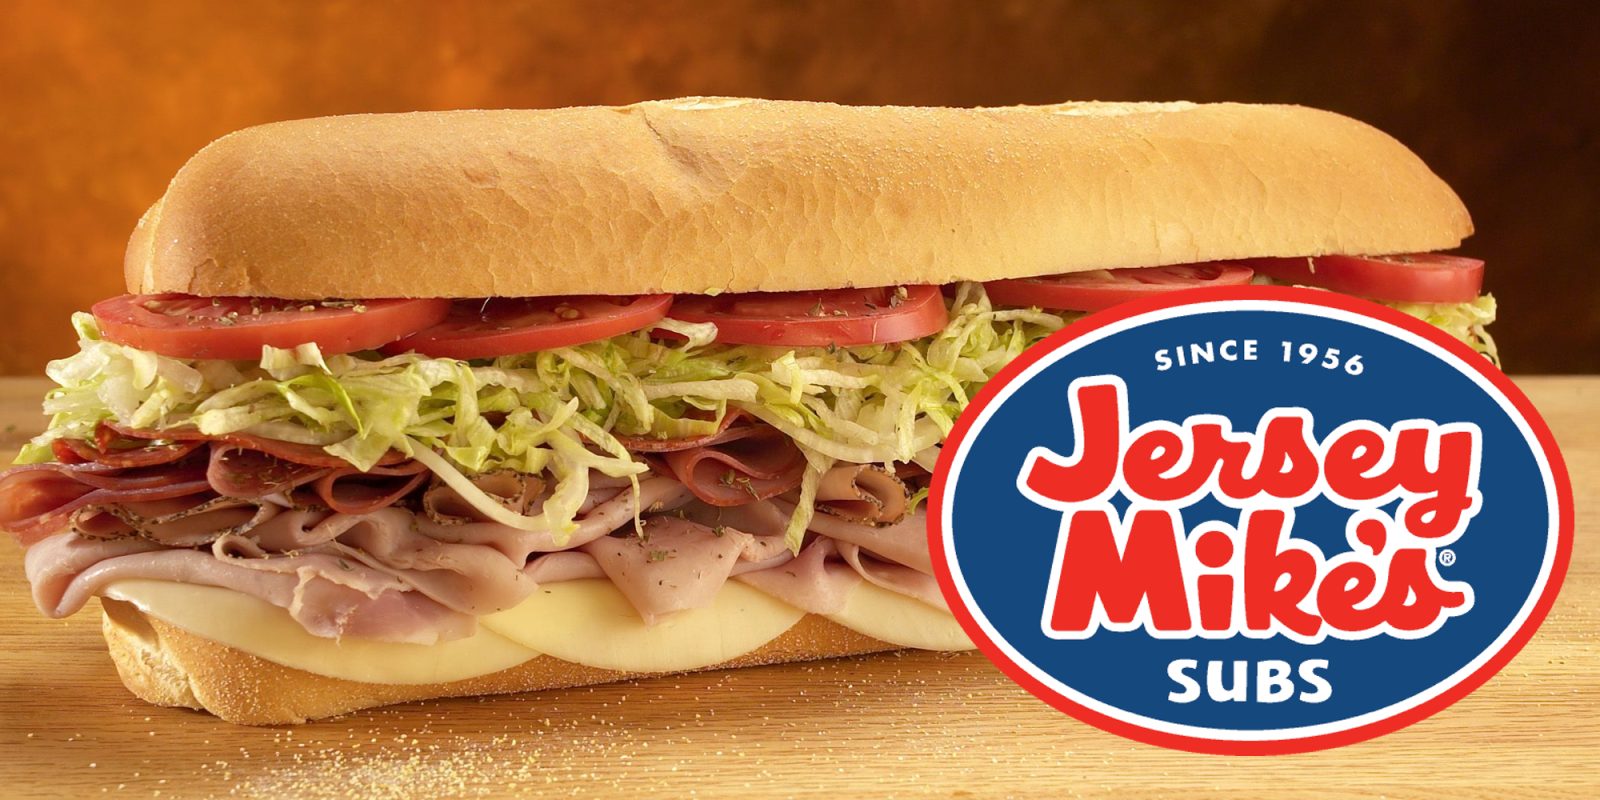 buy-any-sub-at-jersey-mike-s-and-get-one-free-9to5toys